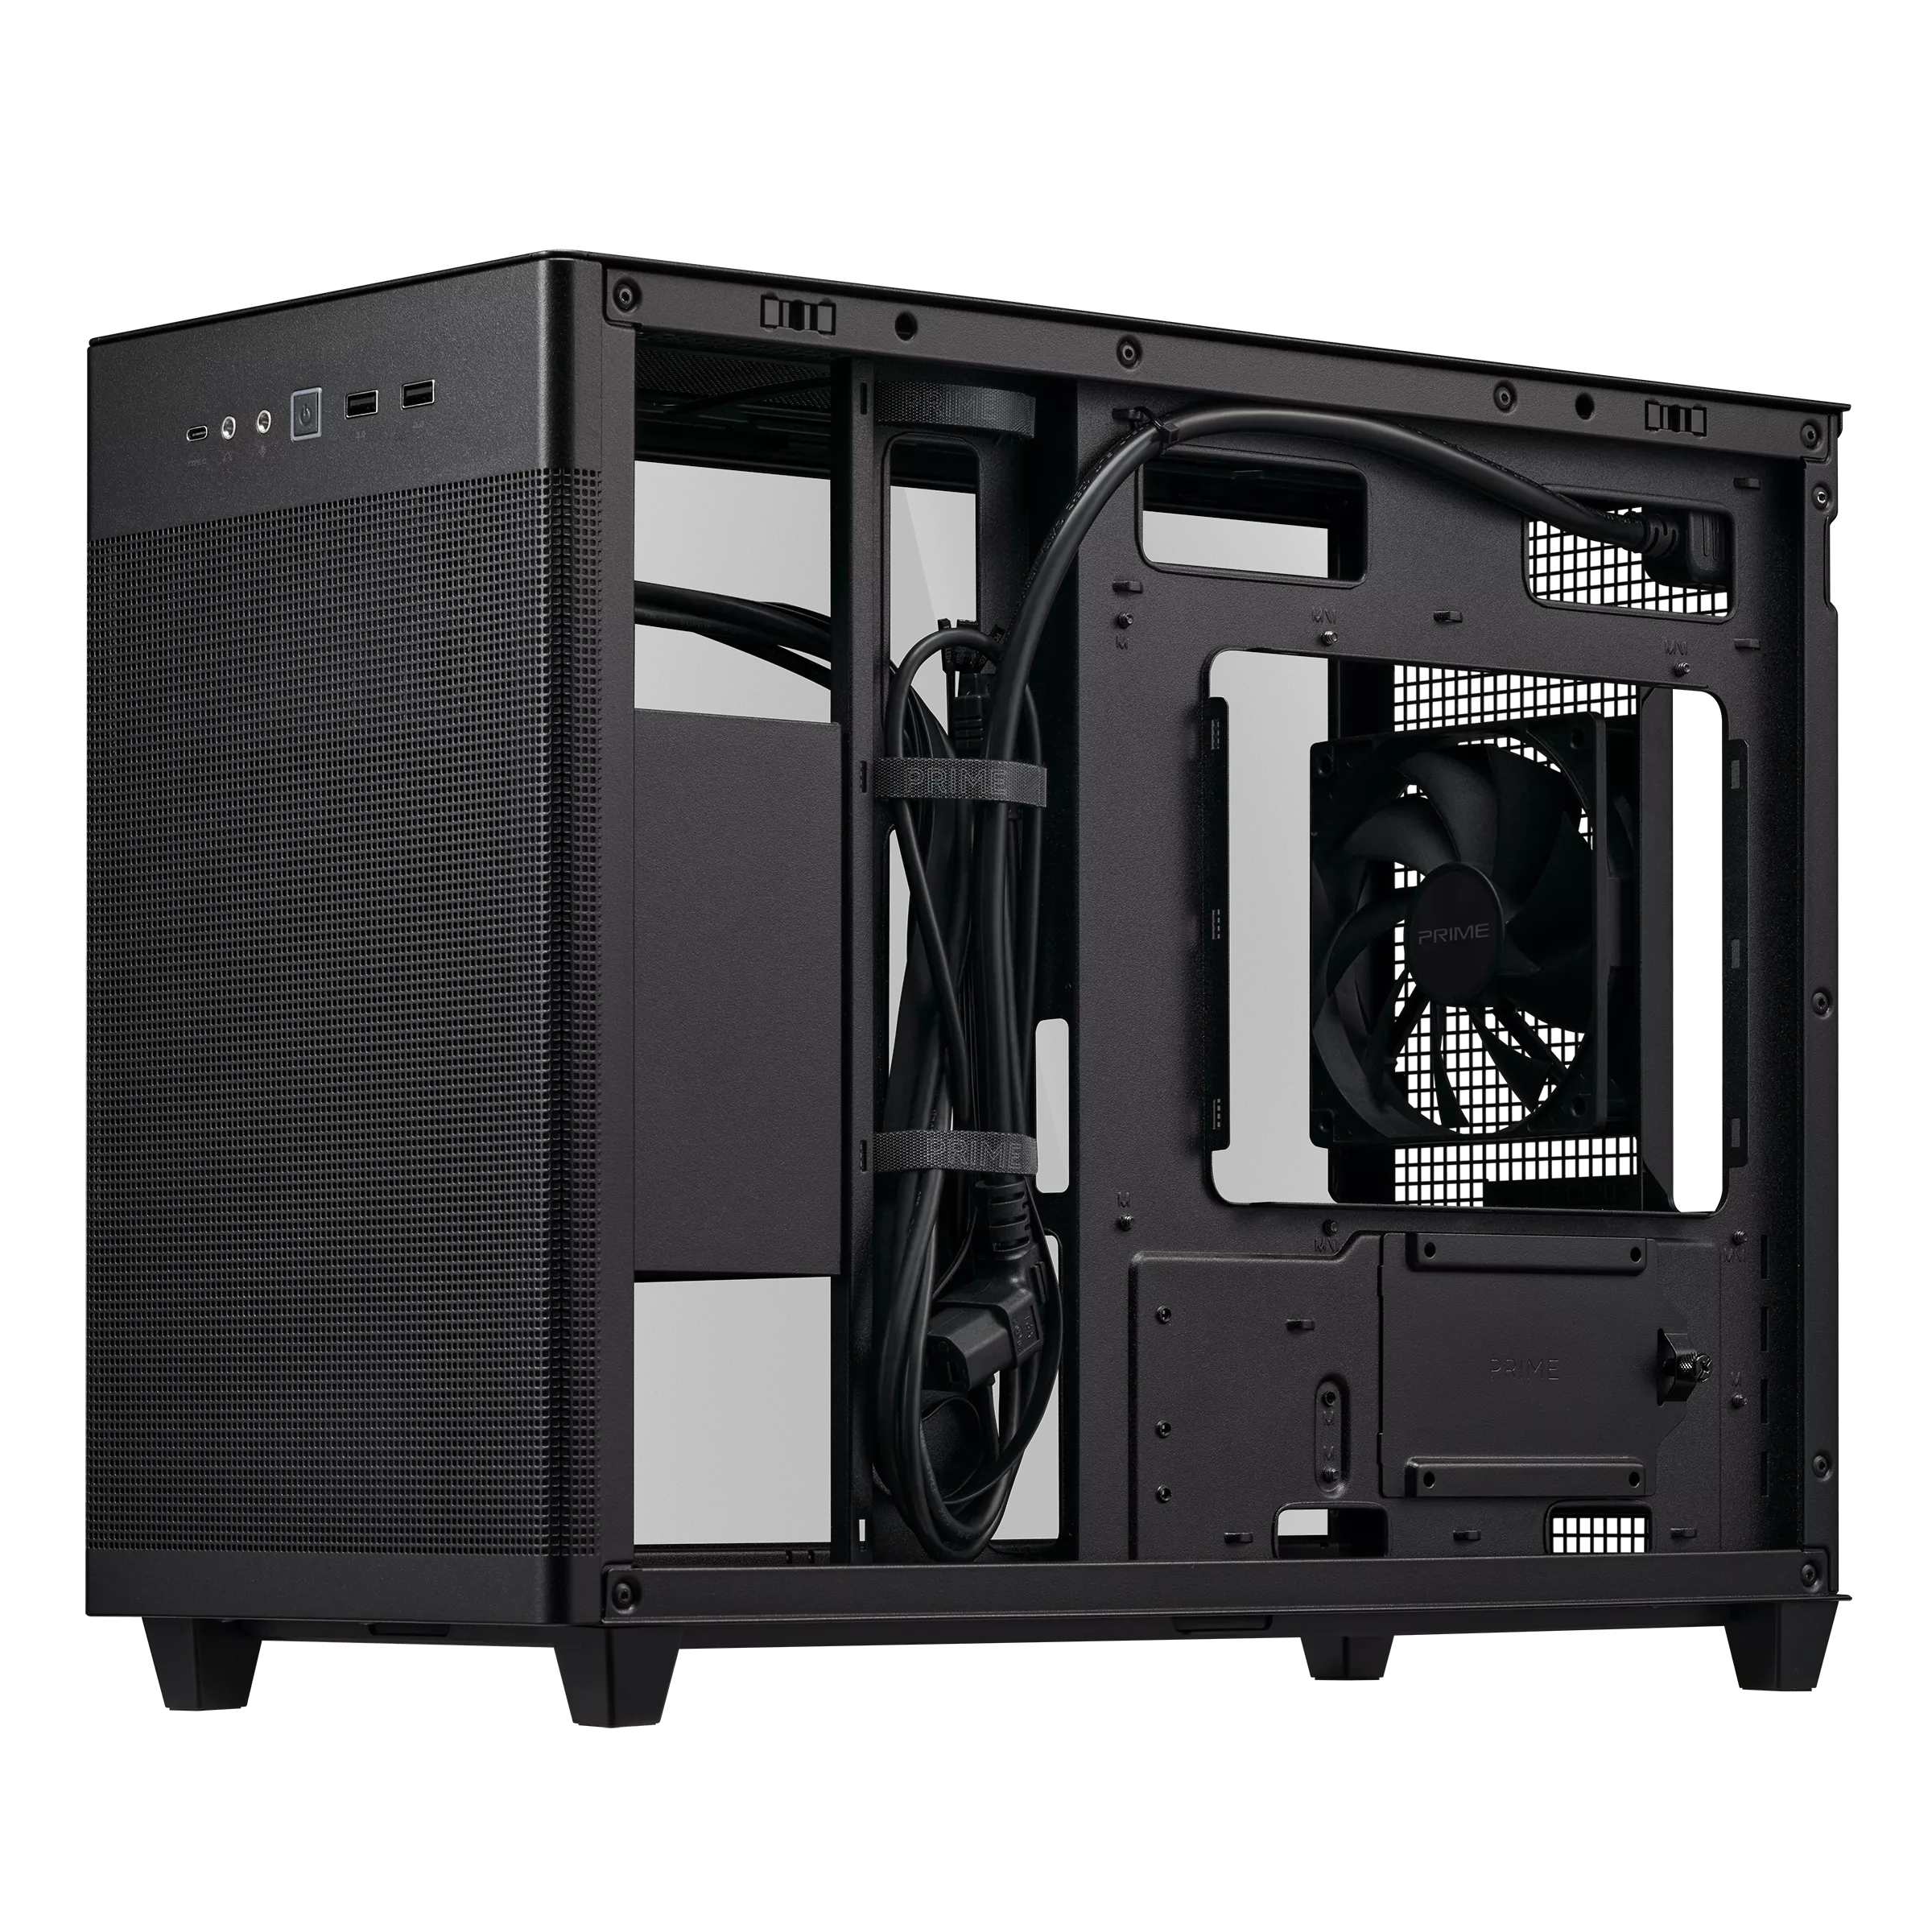 ASUS Adds Prime AP201 Tempered Glass Version mATX Chassis